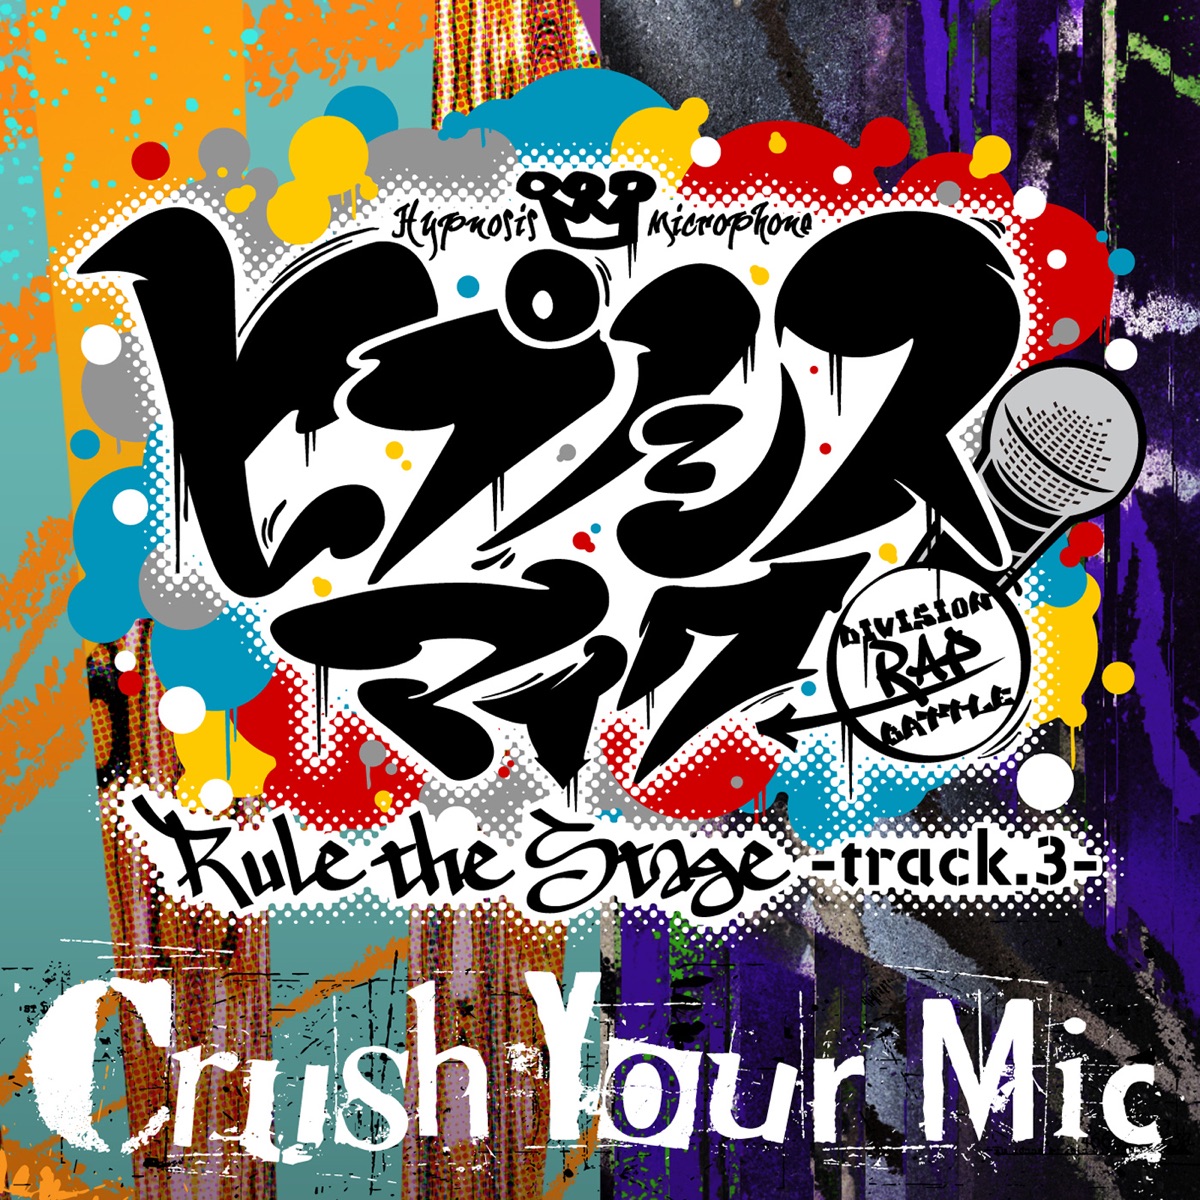 Cover art for『Hypnosis Mic -Division Rap Battle- Rule the Stage (Dotsuitare Honpo・Bad Ass Temple) - Crush Your Mic -Rule the Stage track.3-』from the release『Crush Your Mic -Rule the Stage track.3-』